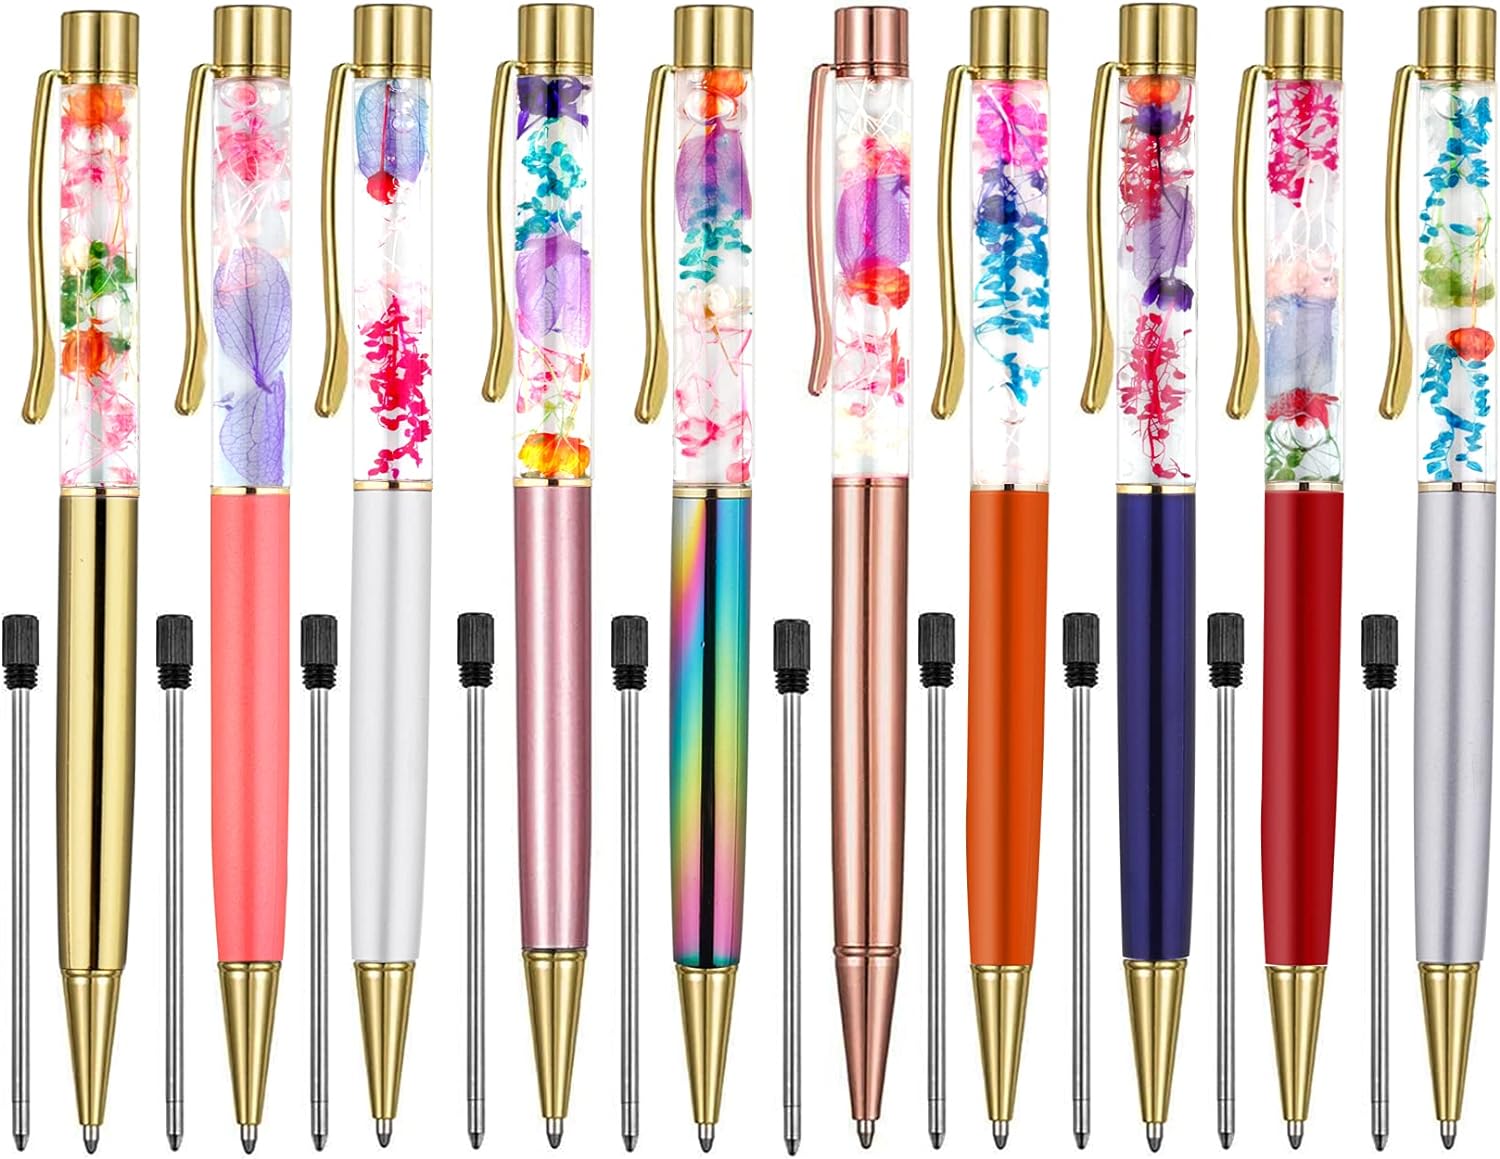 10 Color Metal Ballpoint Pens with Herbarium Floral